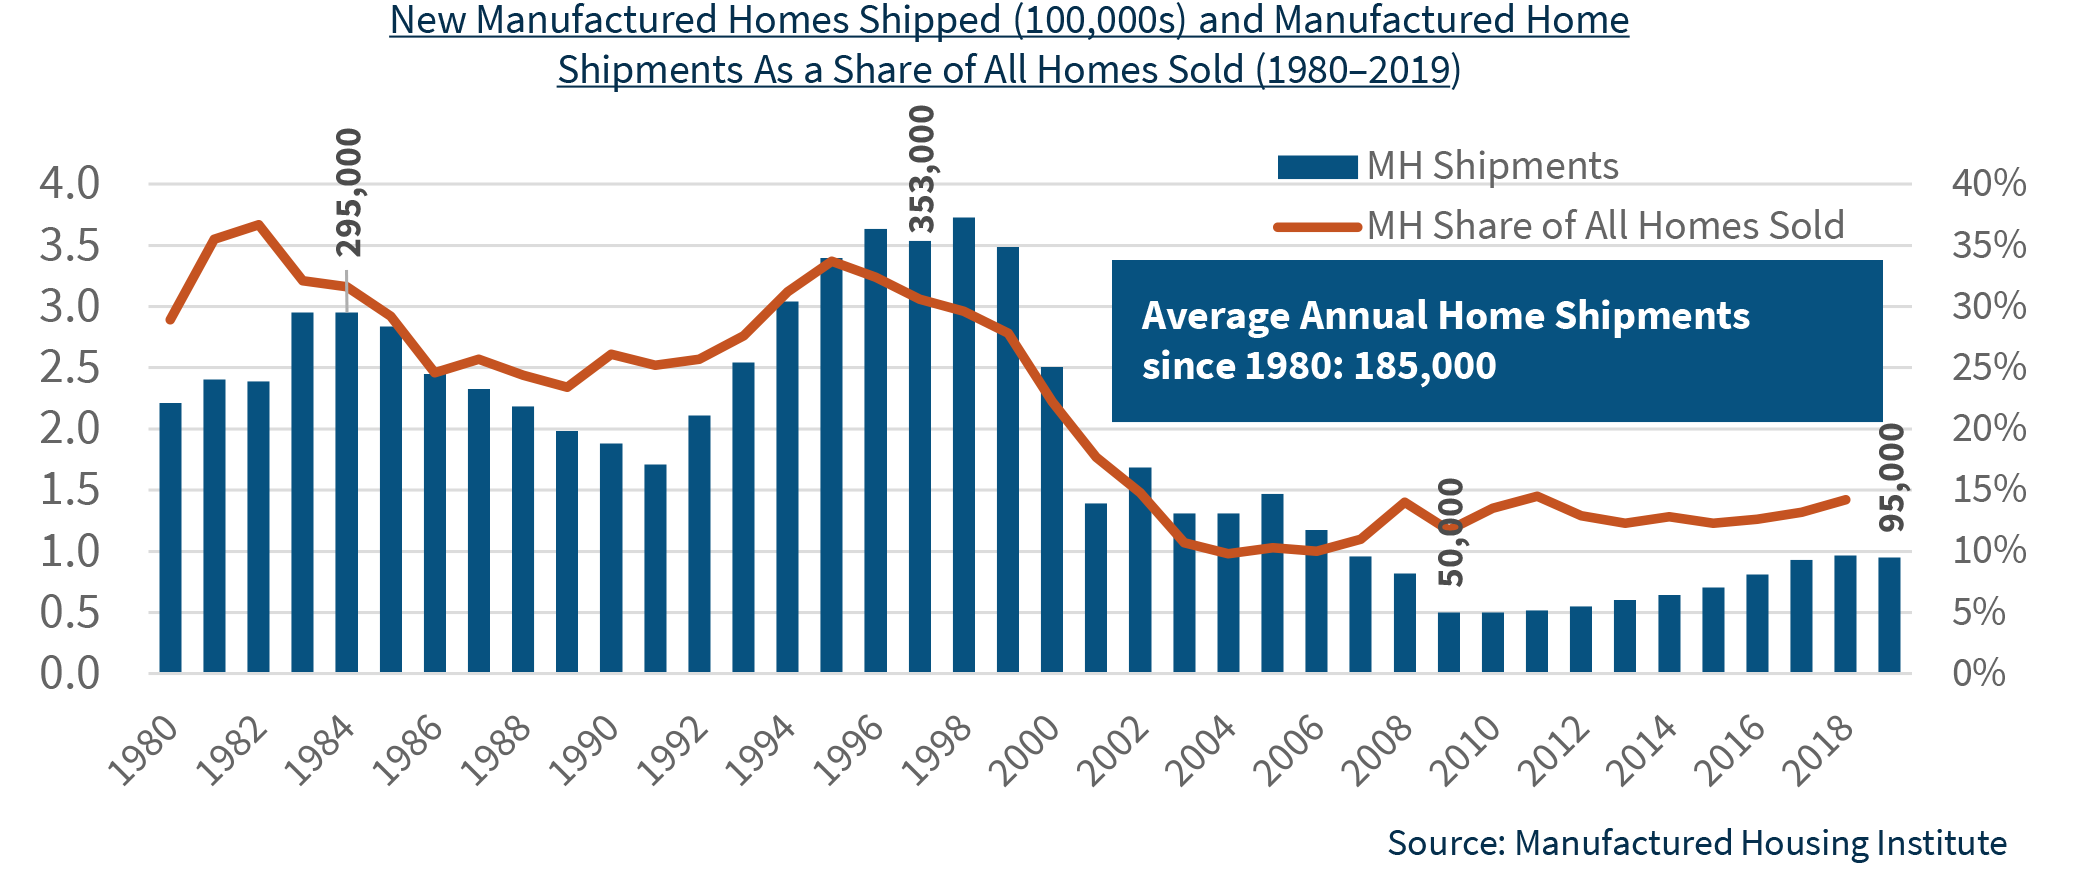 new manufactured homes shipped(100,000s) and manufactured home shipments as a share of all homes sold (1980 - 2019)